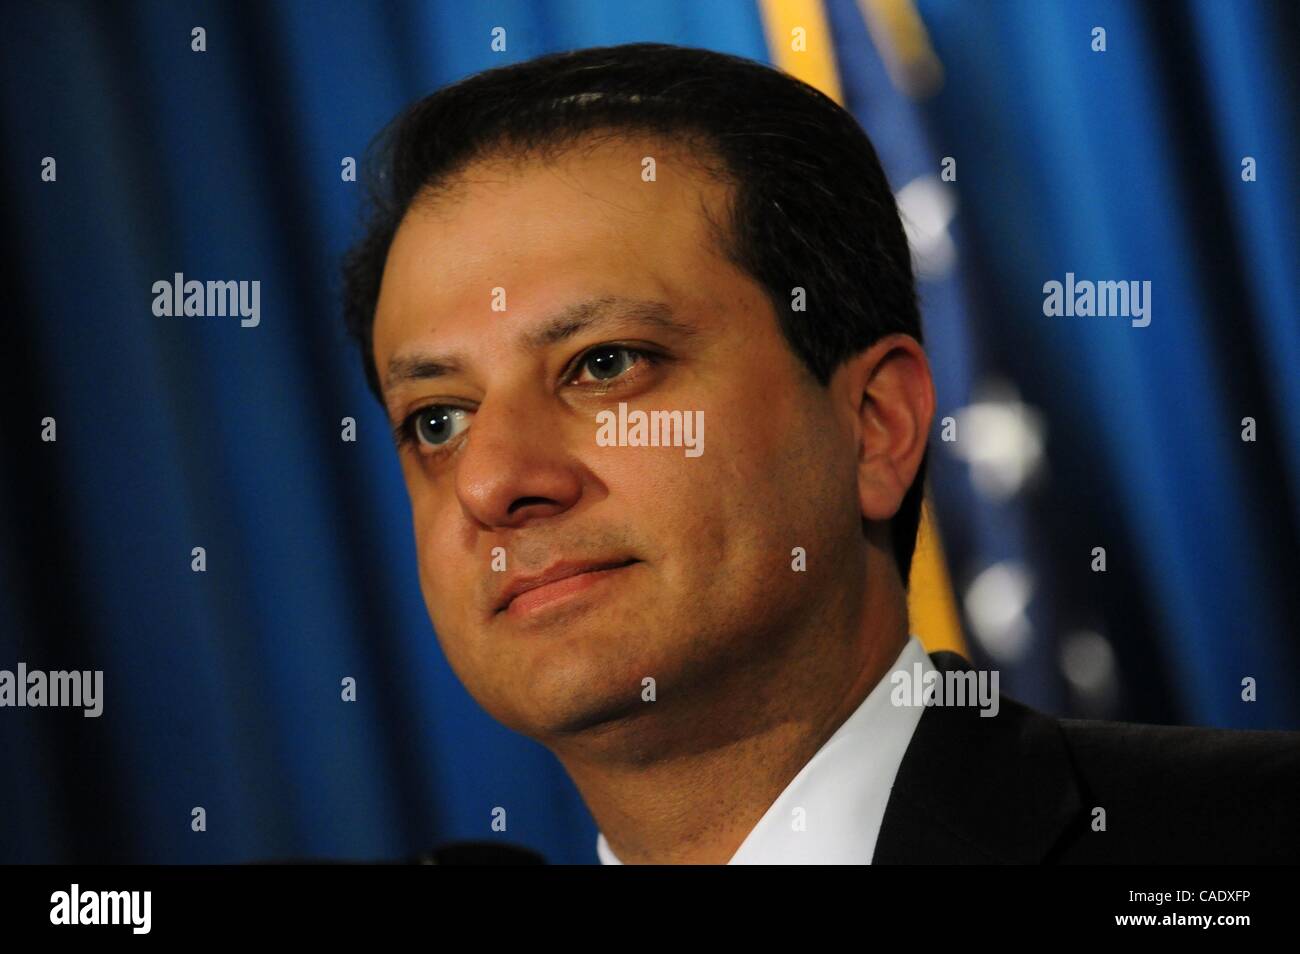 Aug. 10, 2010 - Manhattan, New York, U.S. - United State Attorney for the Southern District of New York PREET BHARARA announces the unsealing of federal charges against 11 defendants for allegedly operating a fraud and bribery scheme through which they obtained millions of dollars in public funds in Stock Photo